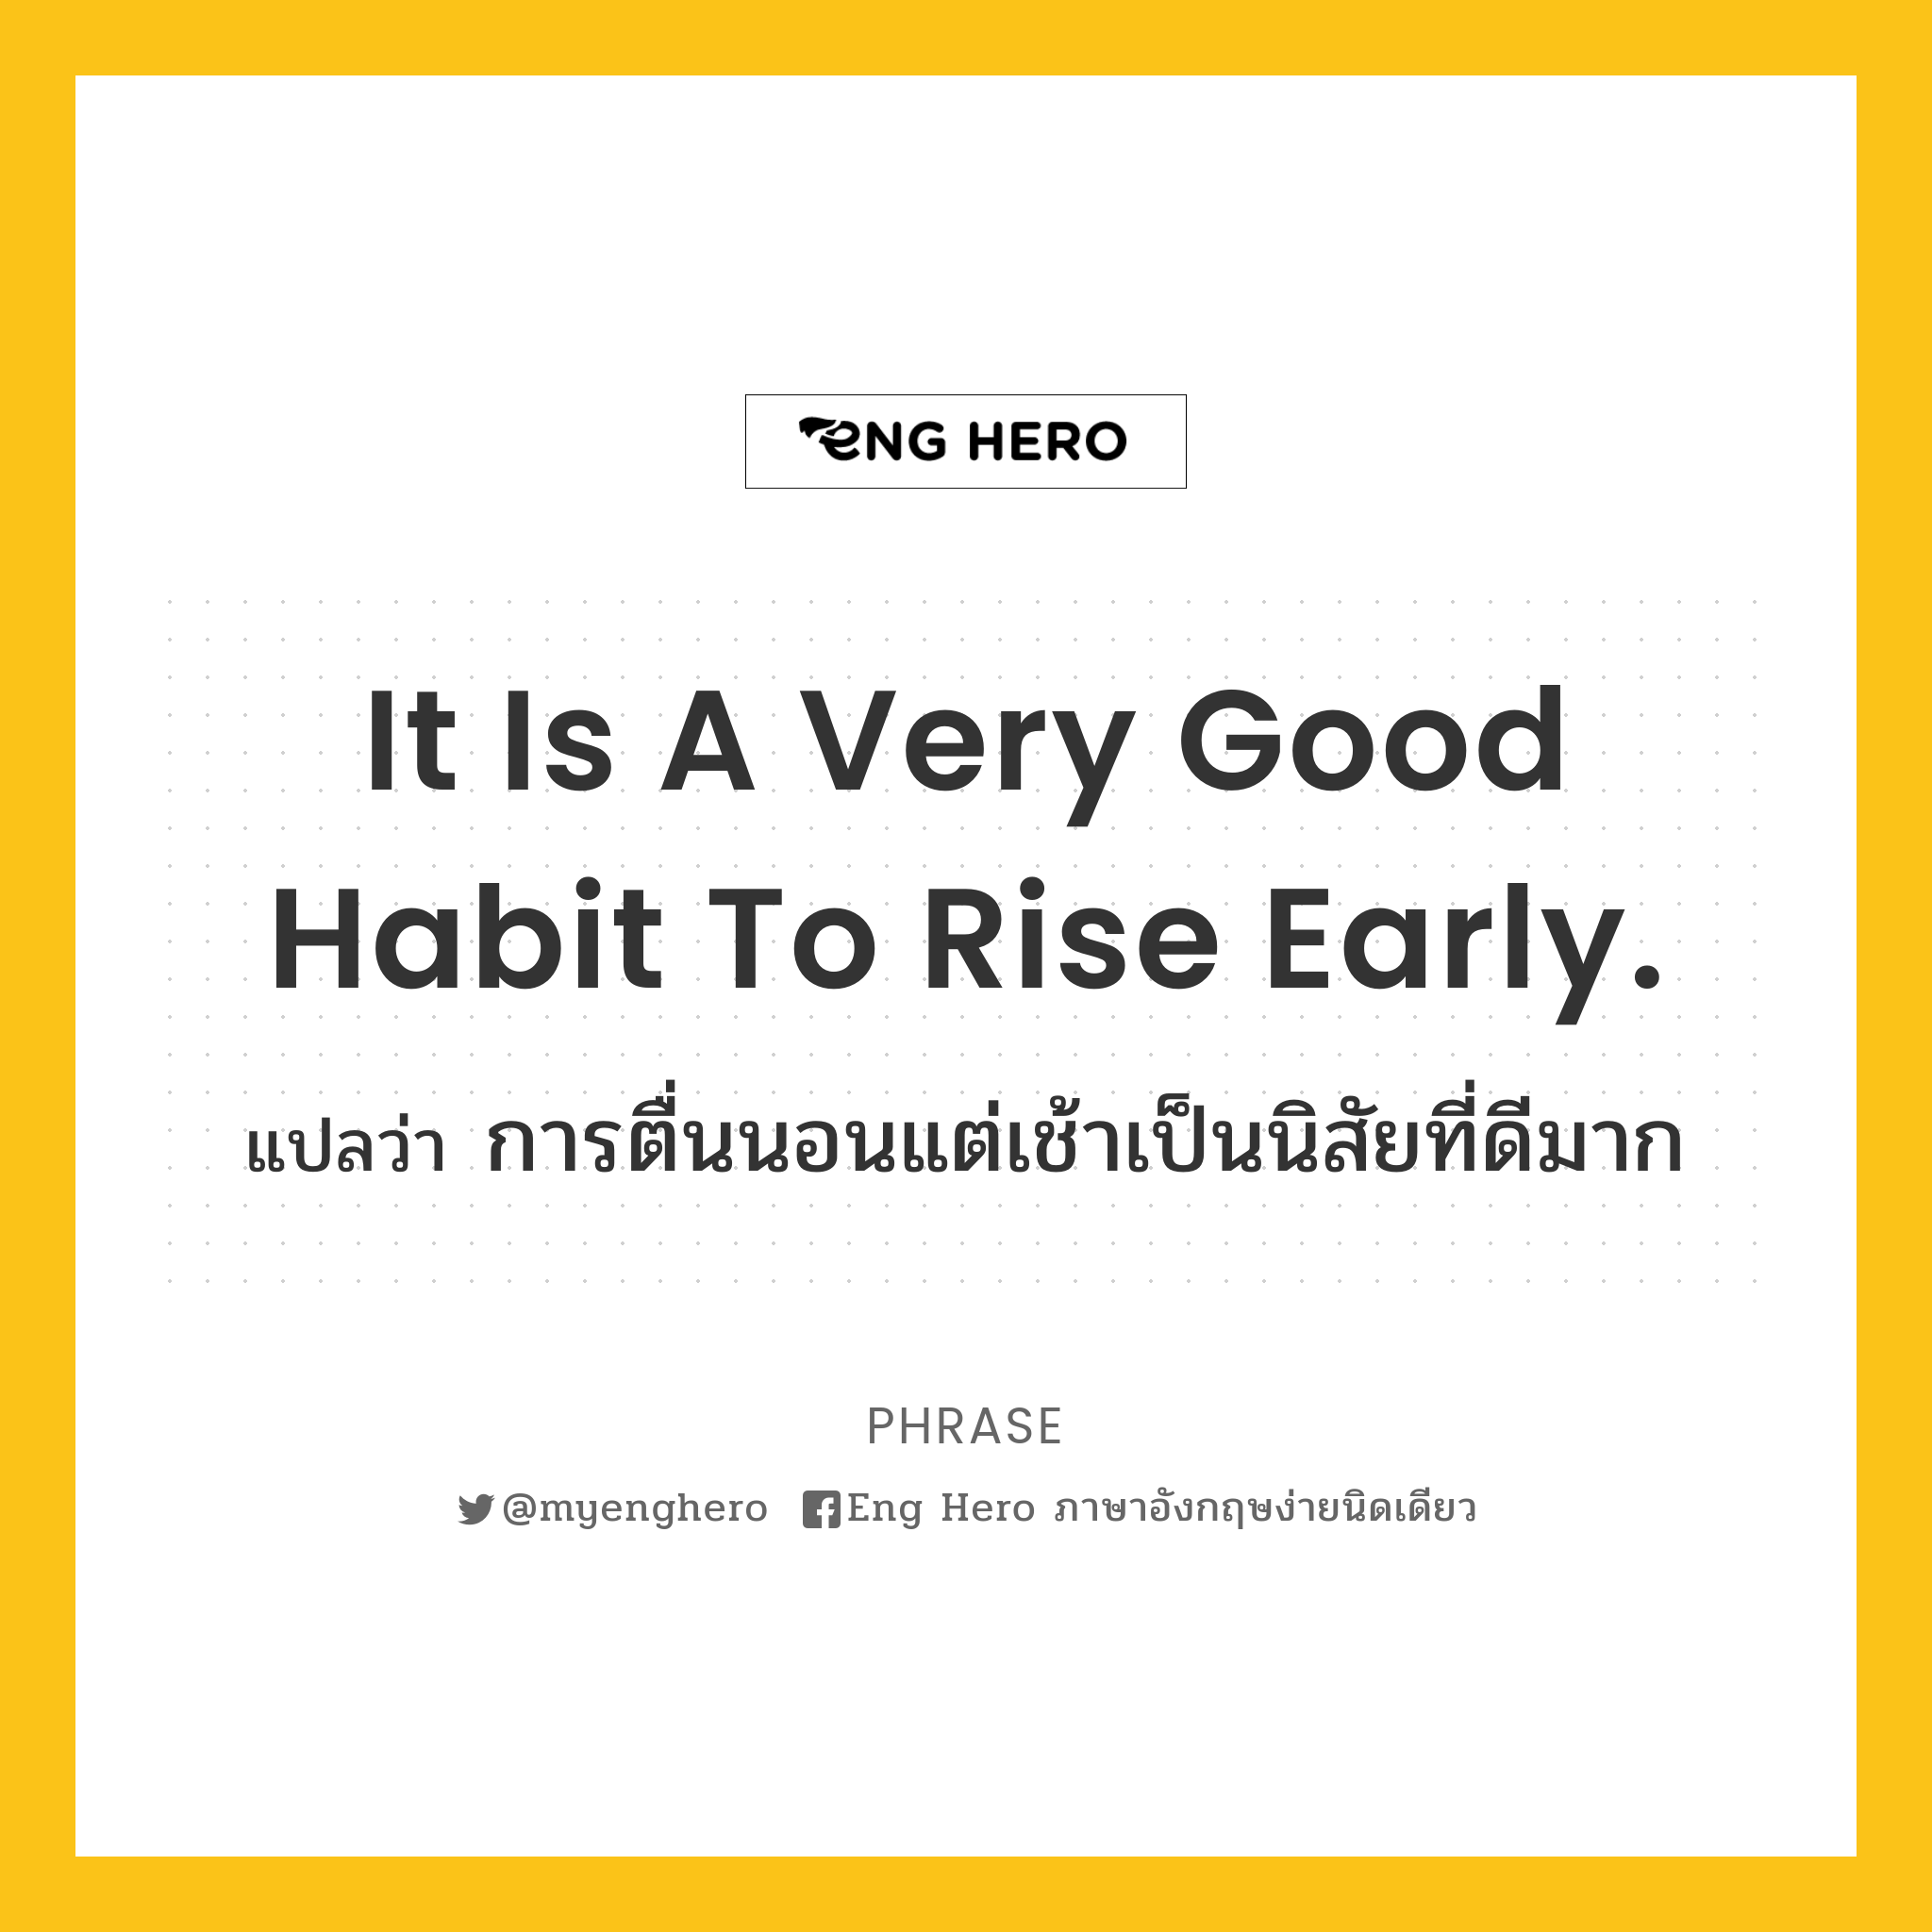 It is a very good habit to rise early.